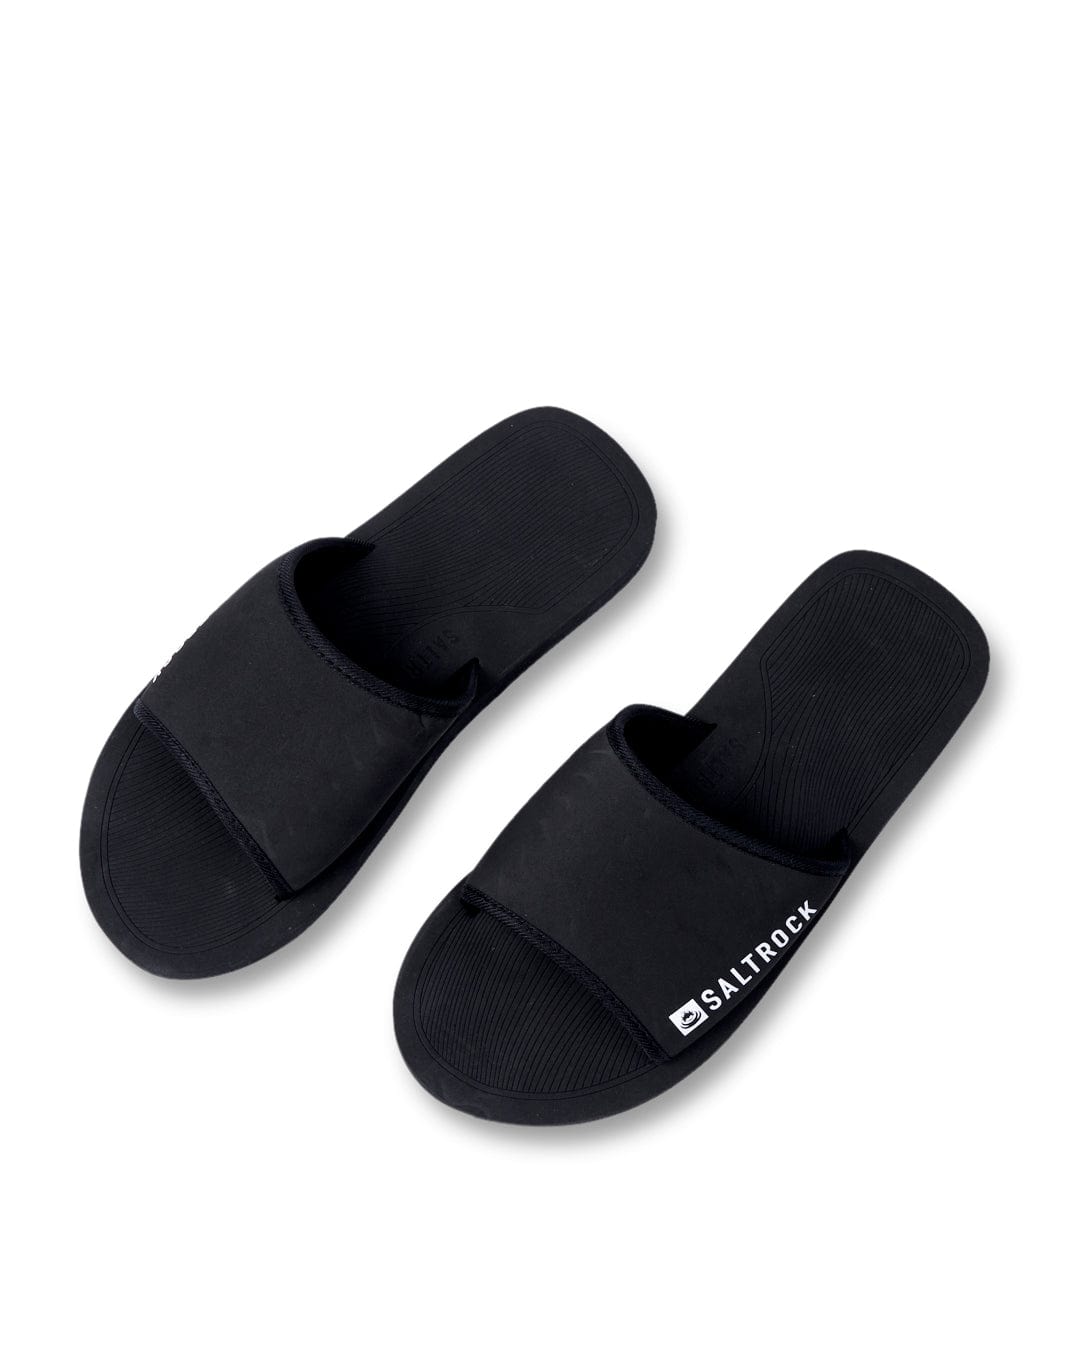 A pair of Ghost - Unisex Sliders - Black with Saltrock branding on the strap, positioned on a white background.